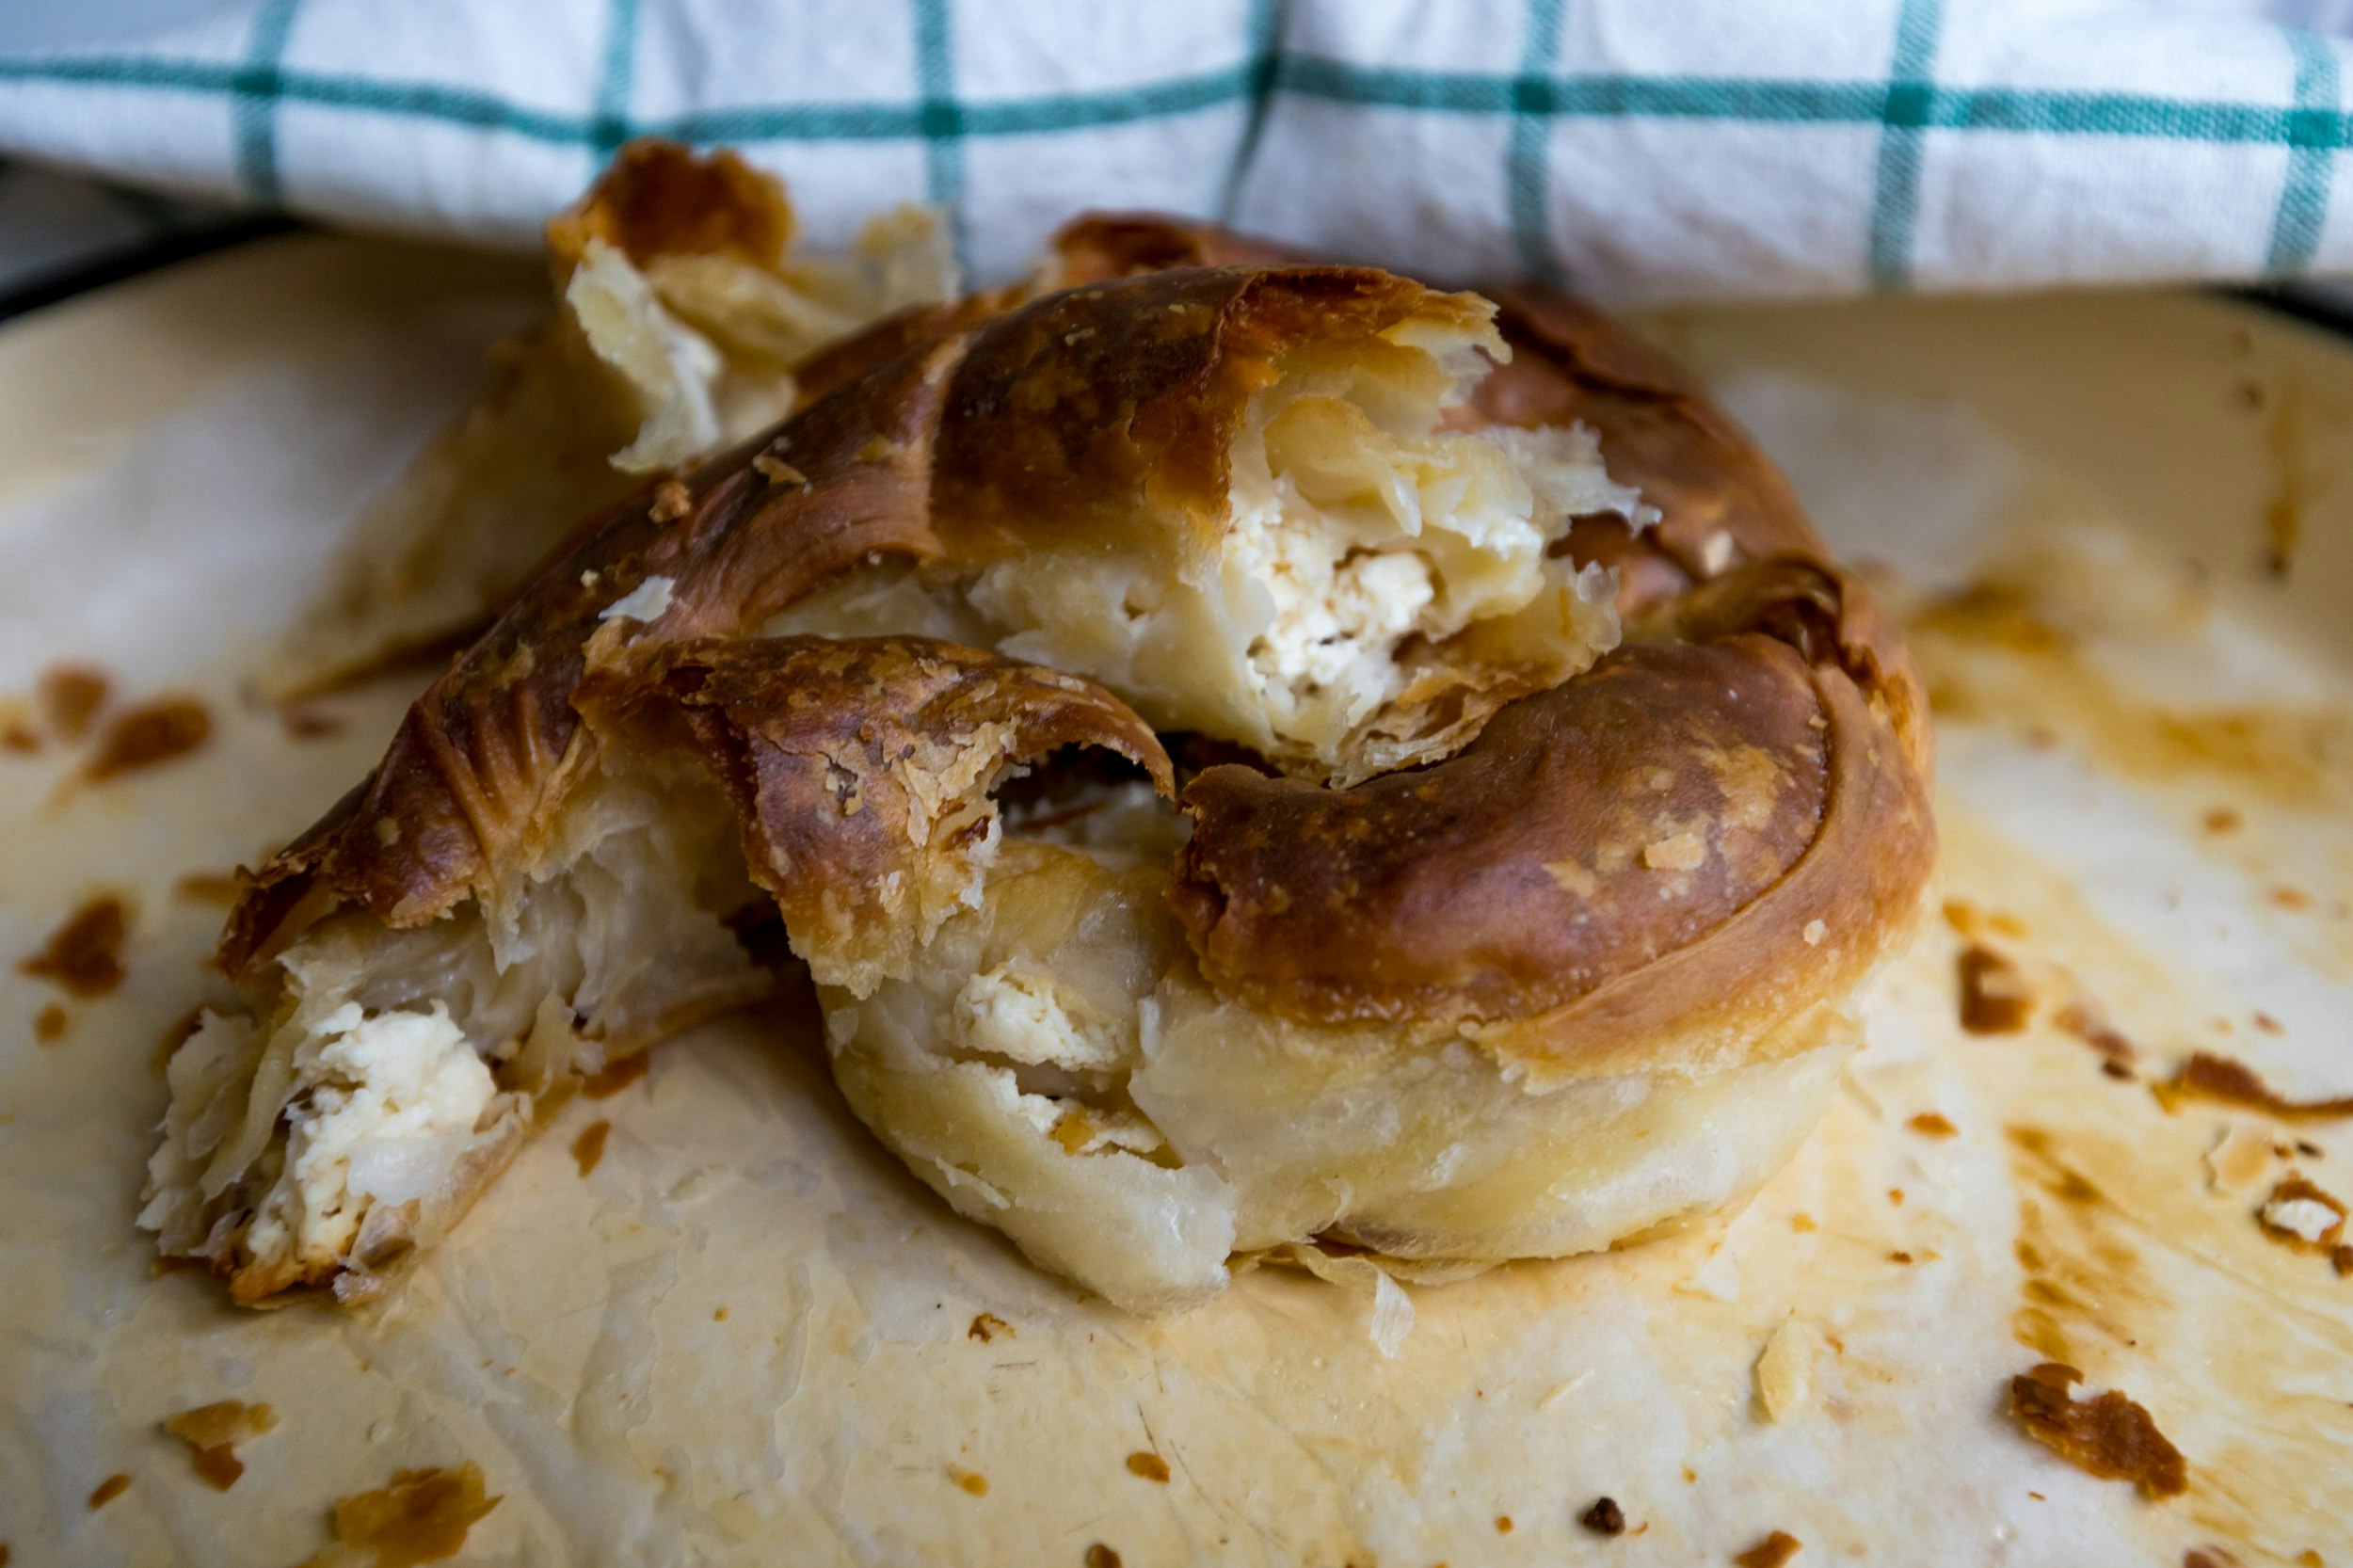 A golden pastry swirl cut to reveal a white cheese filling